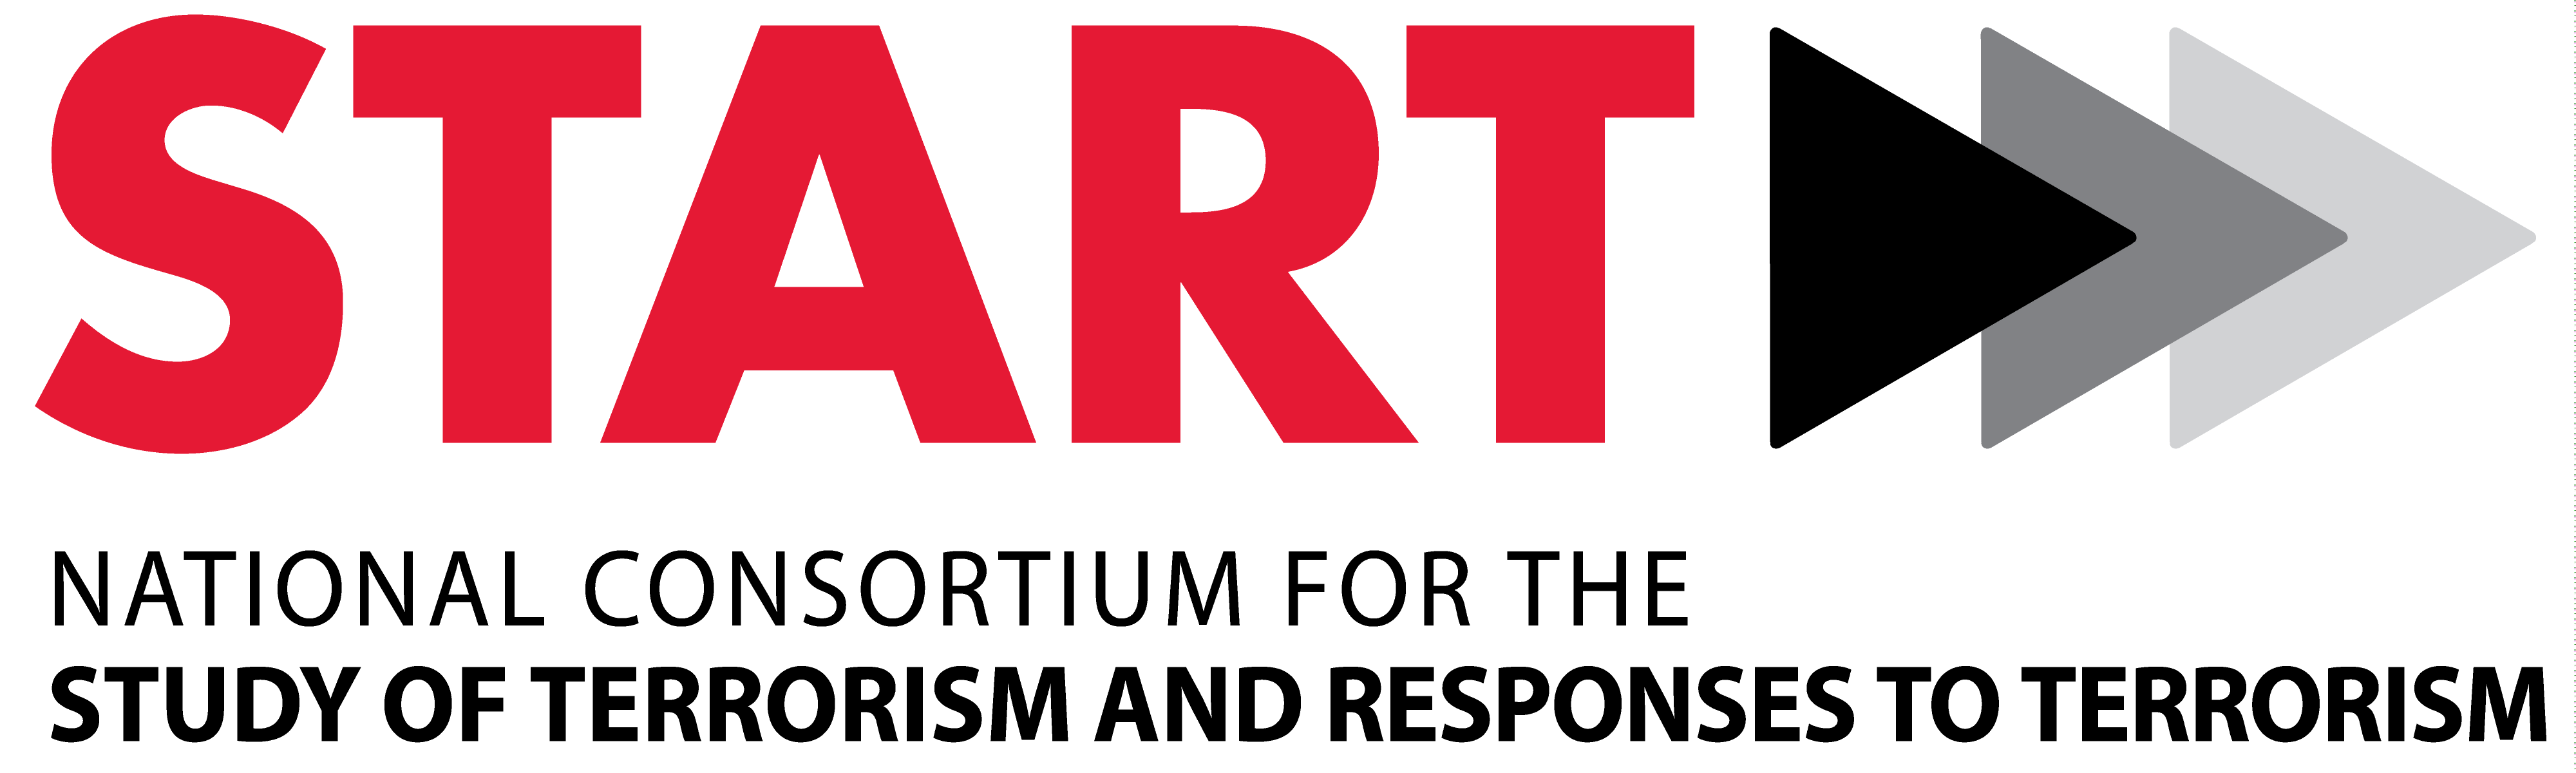 National Consortium for the Study of Terrorism and Responses to Terrorism logo